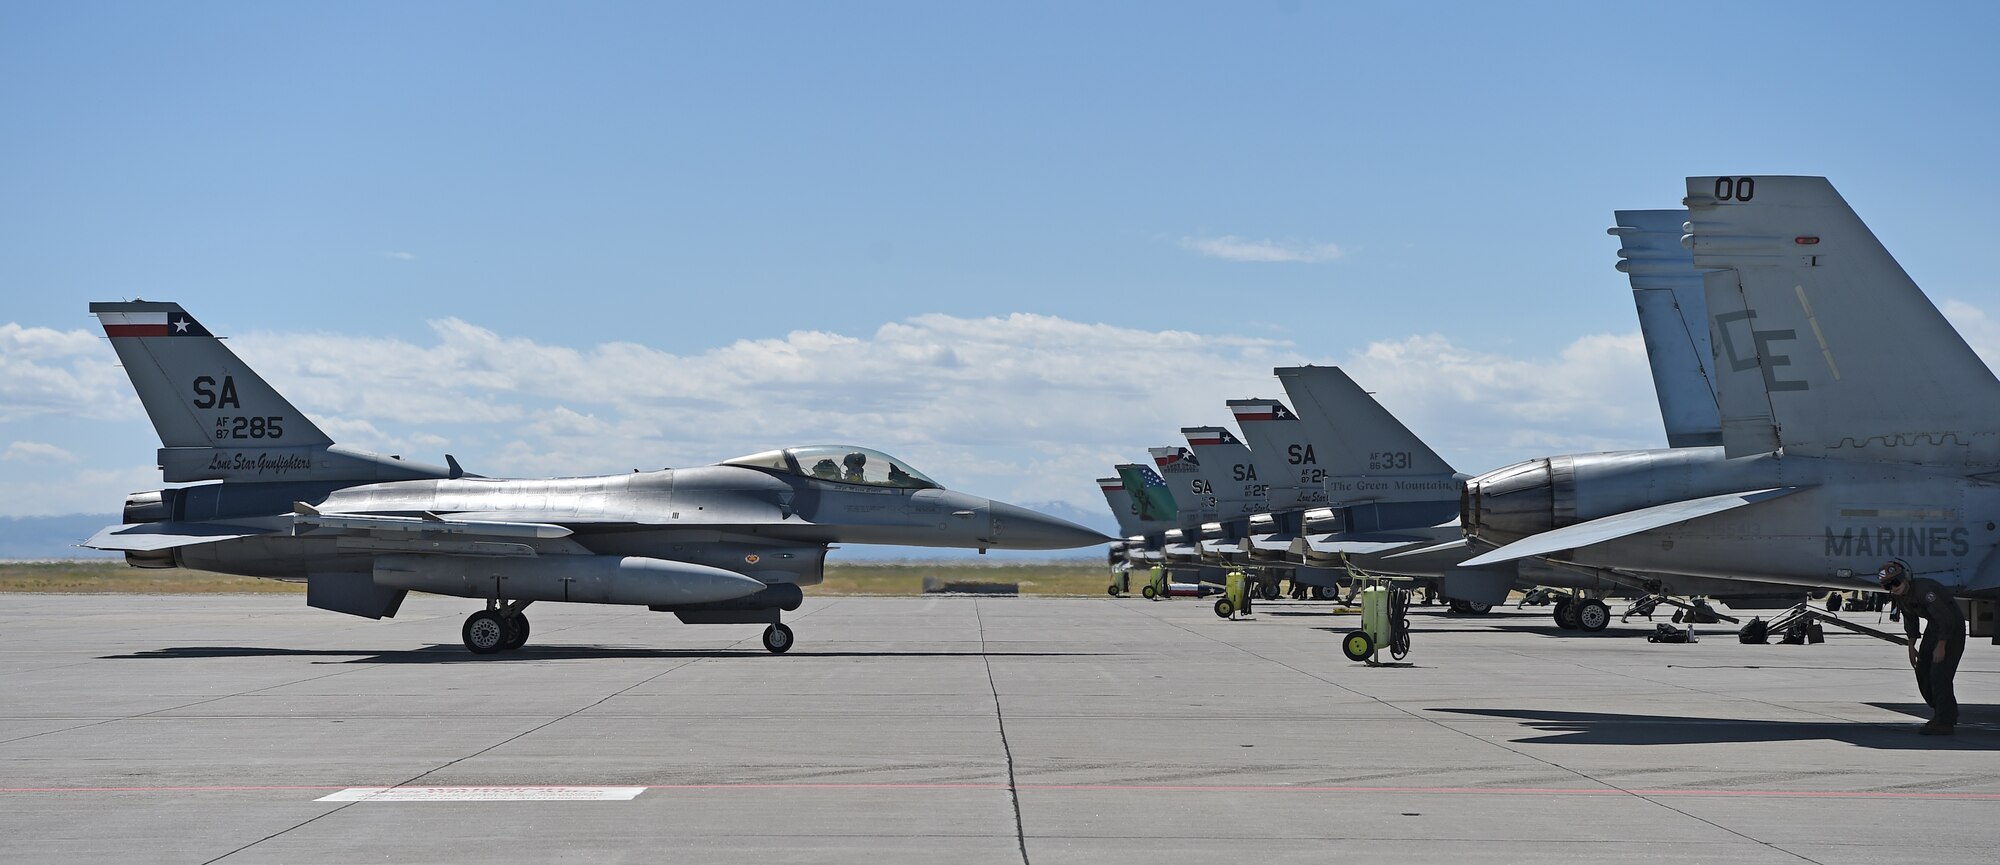 An F-16 Fighting Falcon, assigned to the Air National Guard’s 149th Fighter Wing, headquartered at Joint Base San Antonio-Lackland, returns from a training mission April 29 during Coronet Bronco at Mountain Home Air Force Base, Idaho. The exercise is a capstone event for the student fighter pilots and evaluates their knowledge and skills before they graduate and proceed to the next phase of their training. The exercise also incorporates many of the home unit’s support personnel, which includes members from maintenance, weapons, logistics, communication, finance and other various other shops.